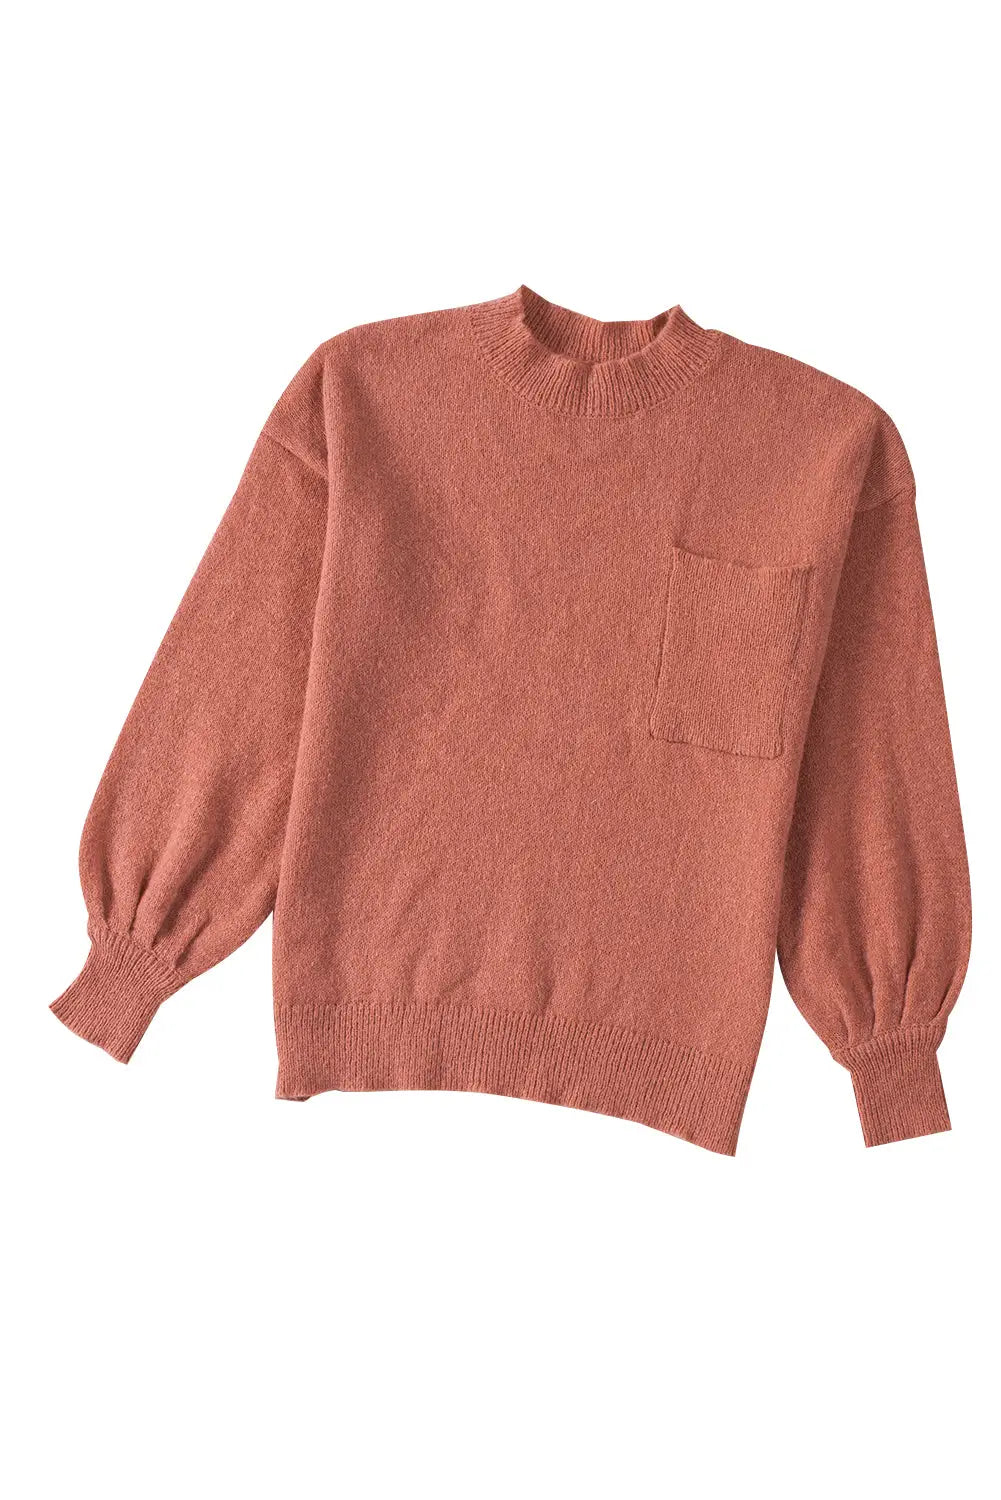 Solid color puffy sleeve pocketed sweater - sweaters & cardigans